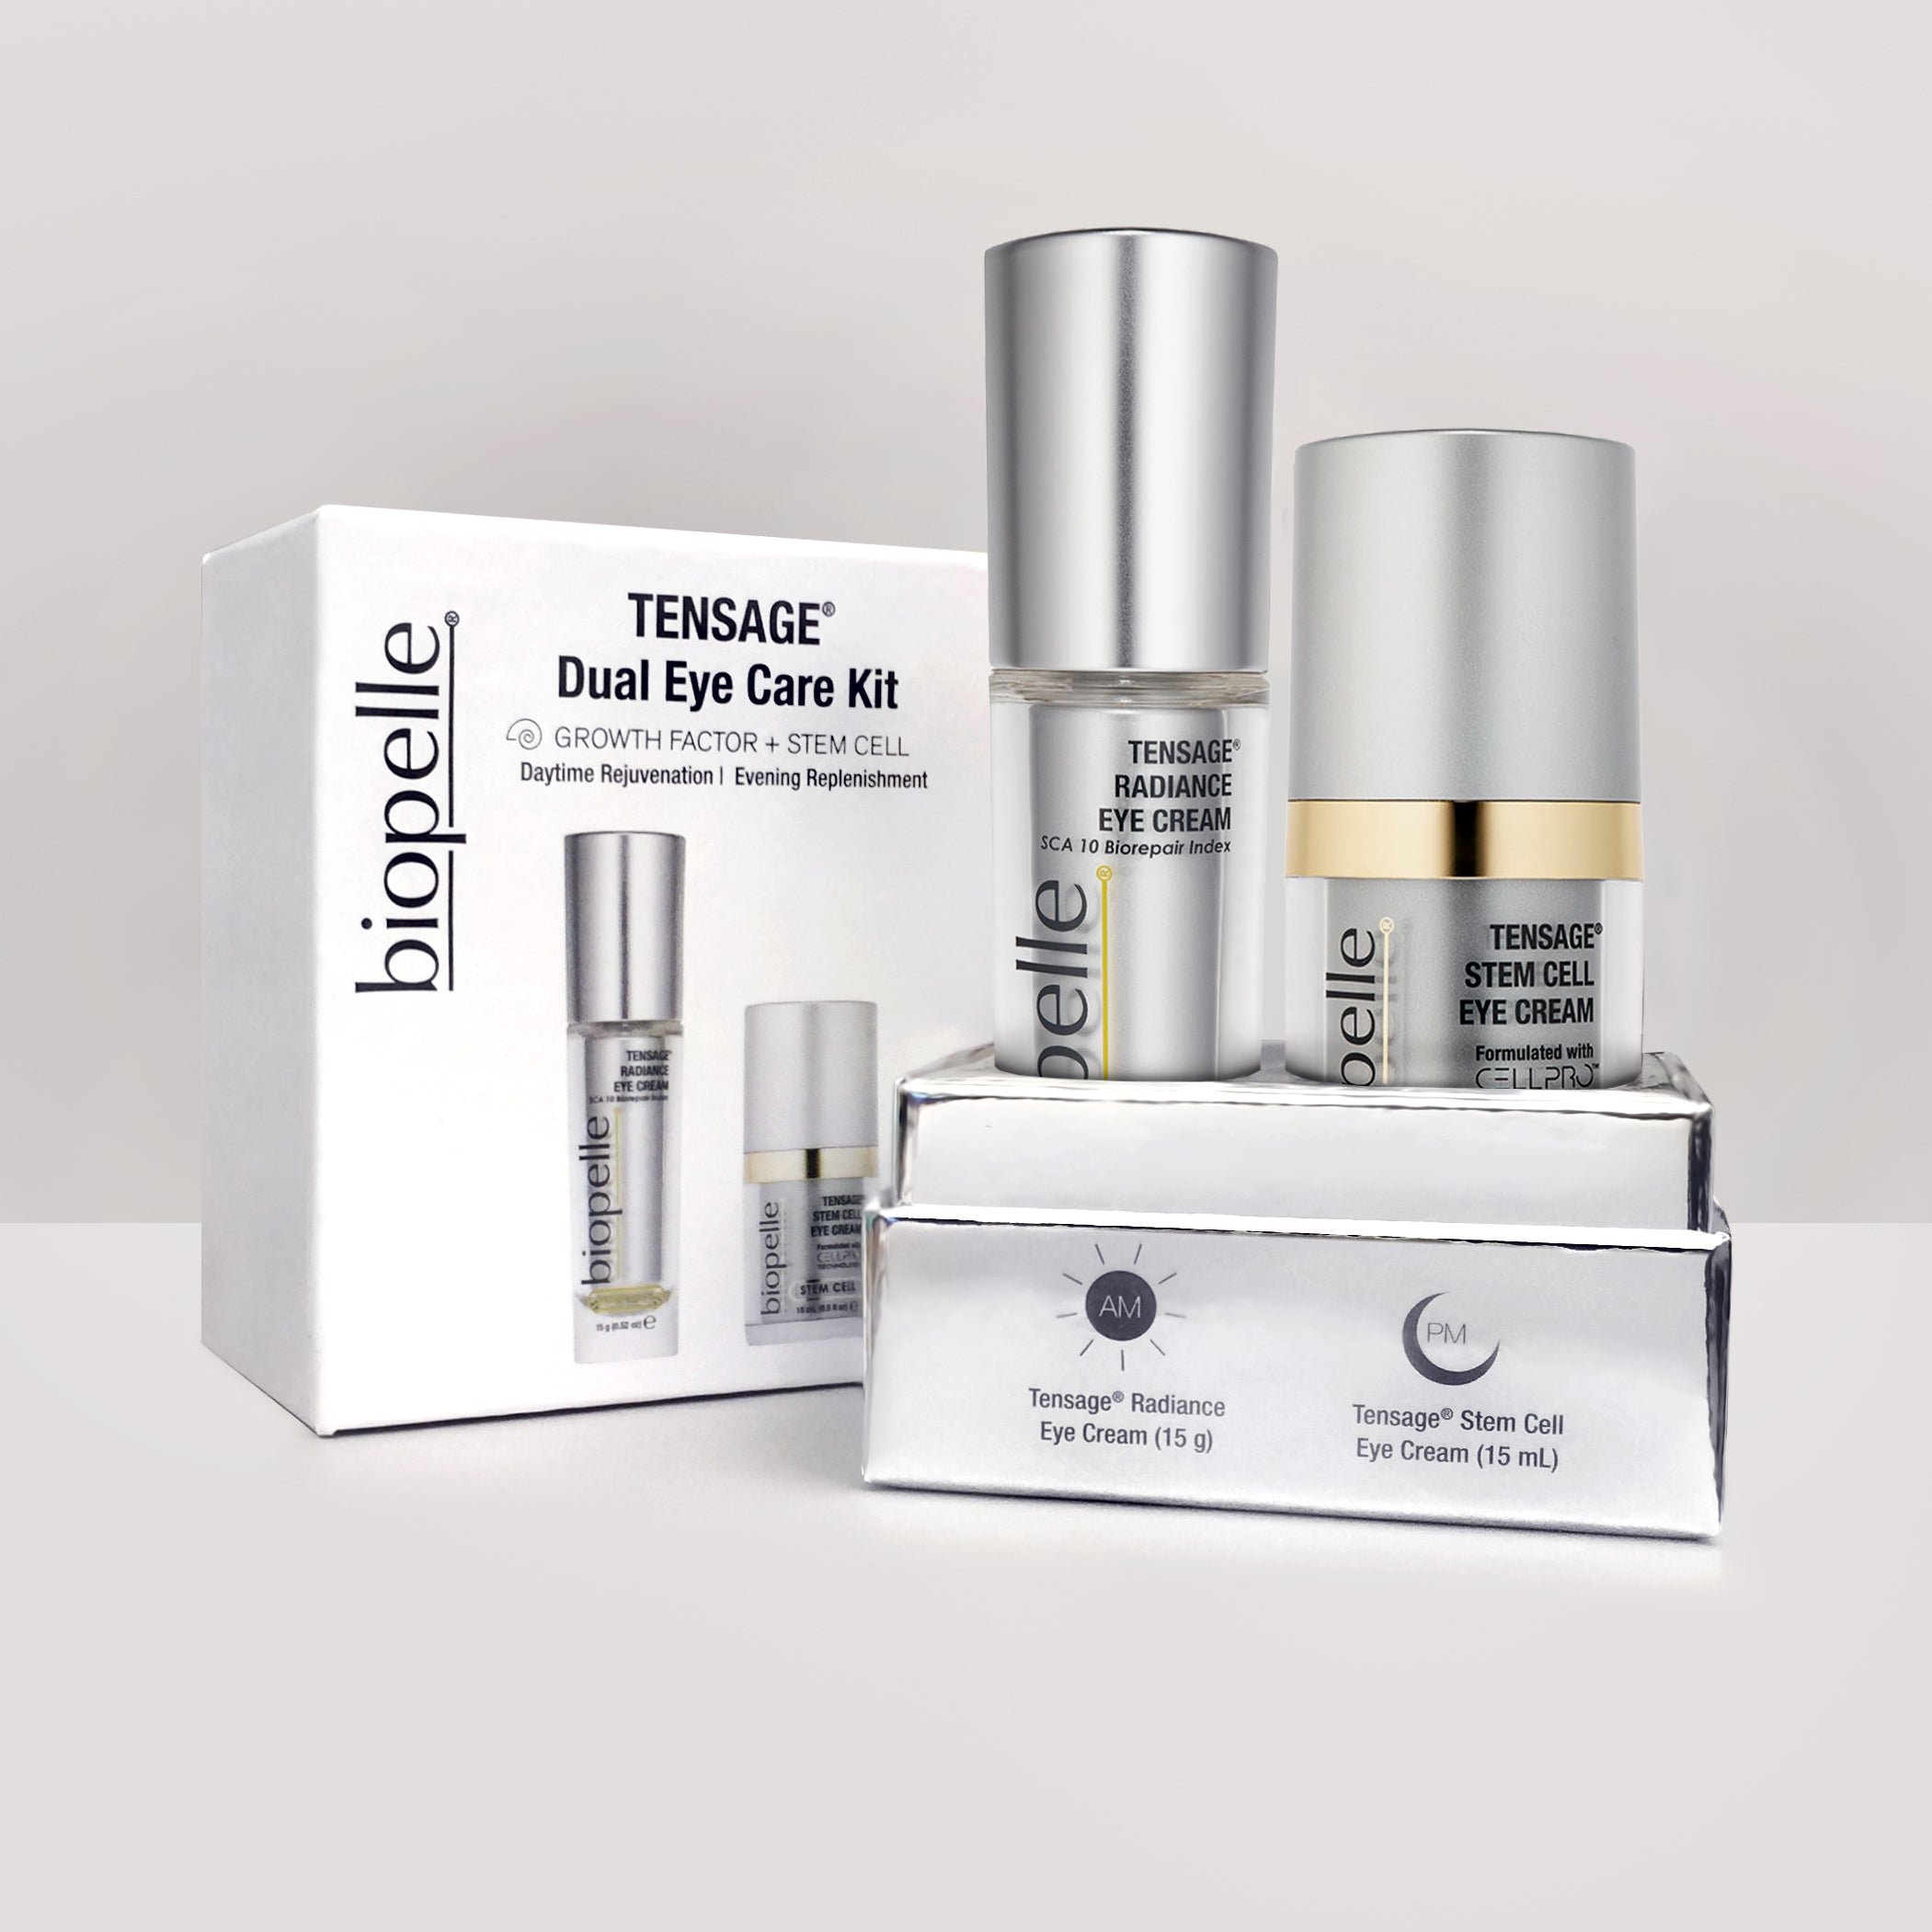 Biopelle Dual Eye With Both Tensage Radiance Eye 15g and Stem Cell Eye 15ml